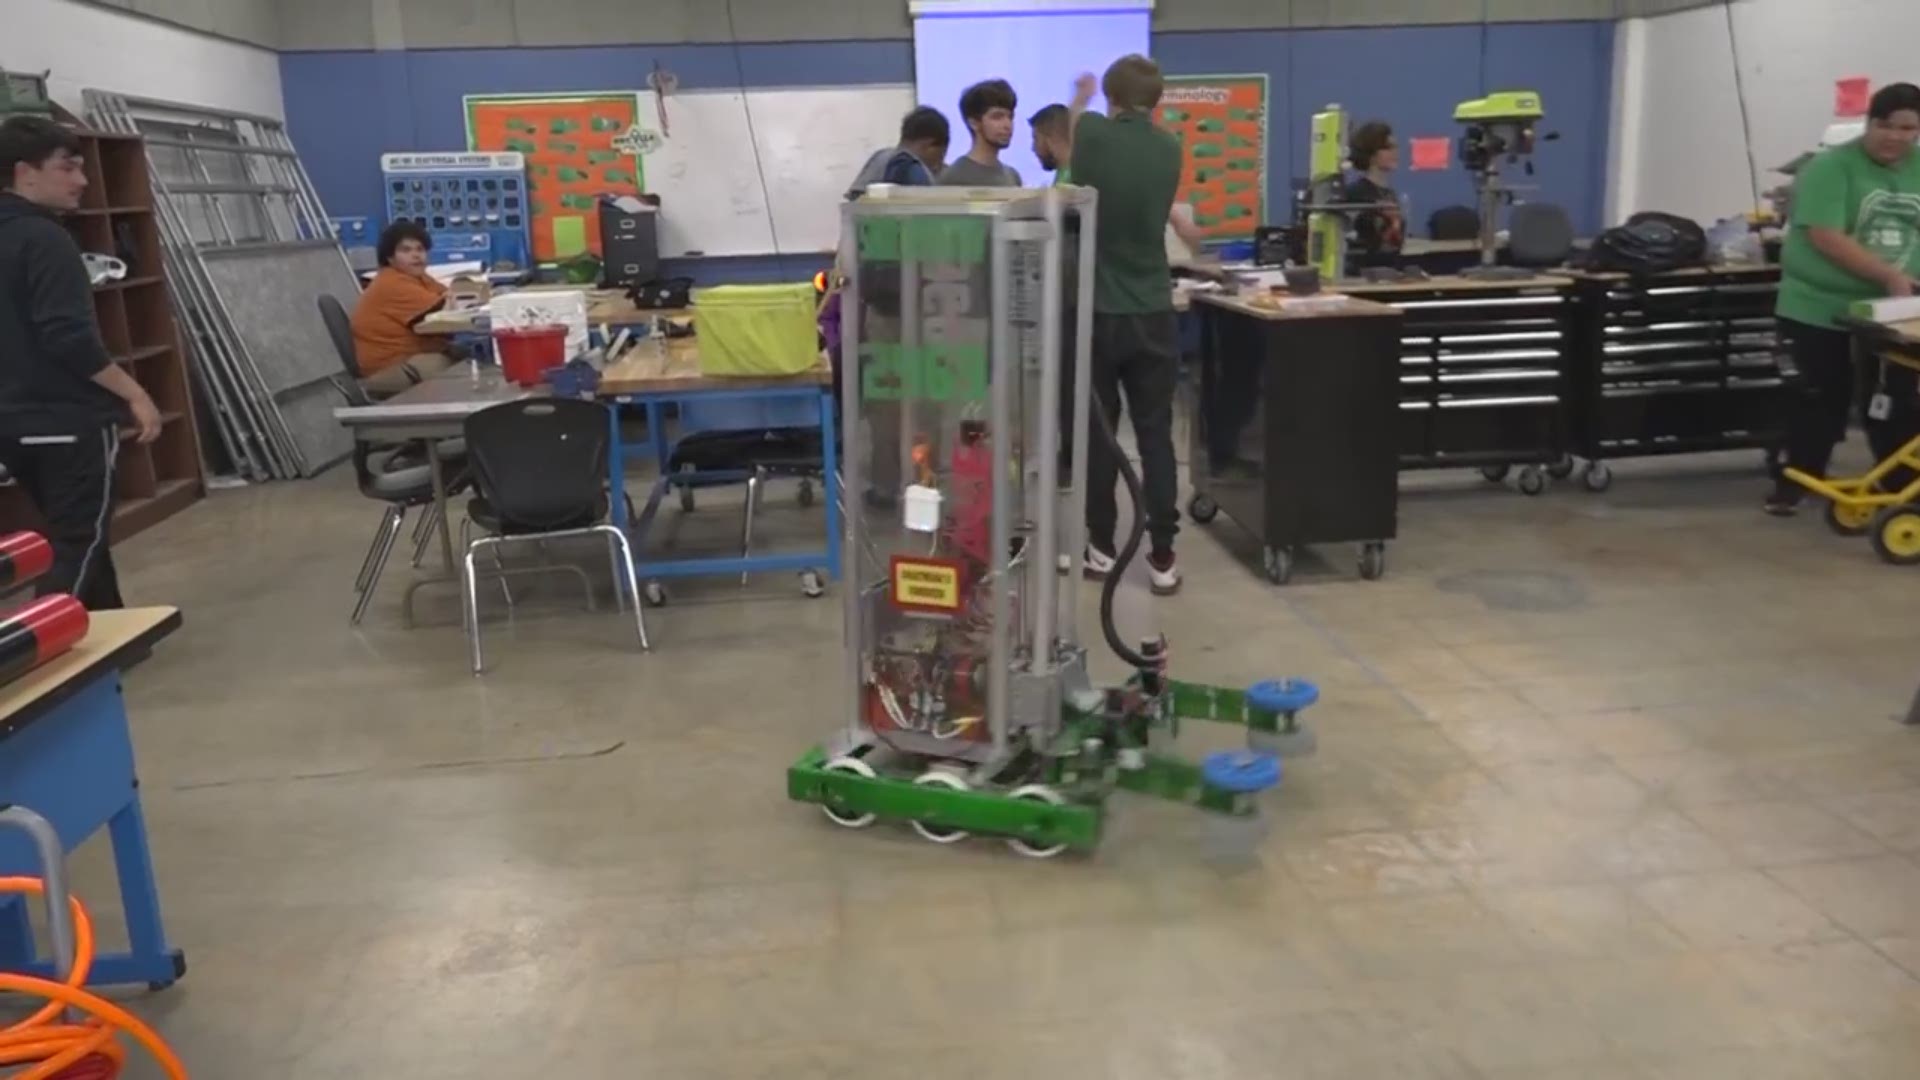 The Sam Houston High School Robotics Team is already set for the future, even before their UIL competition later this year.